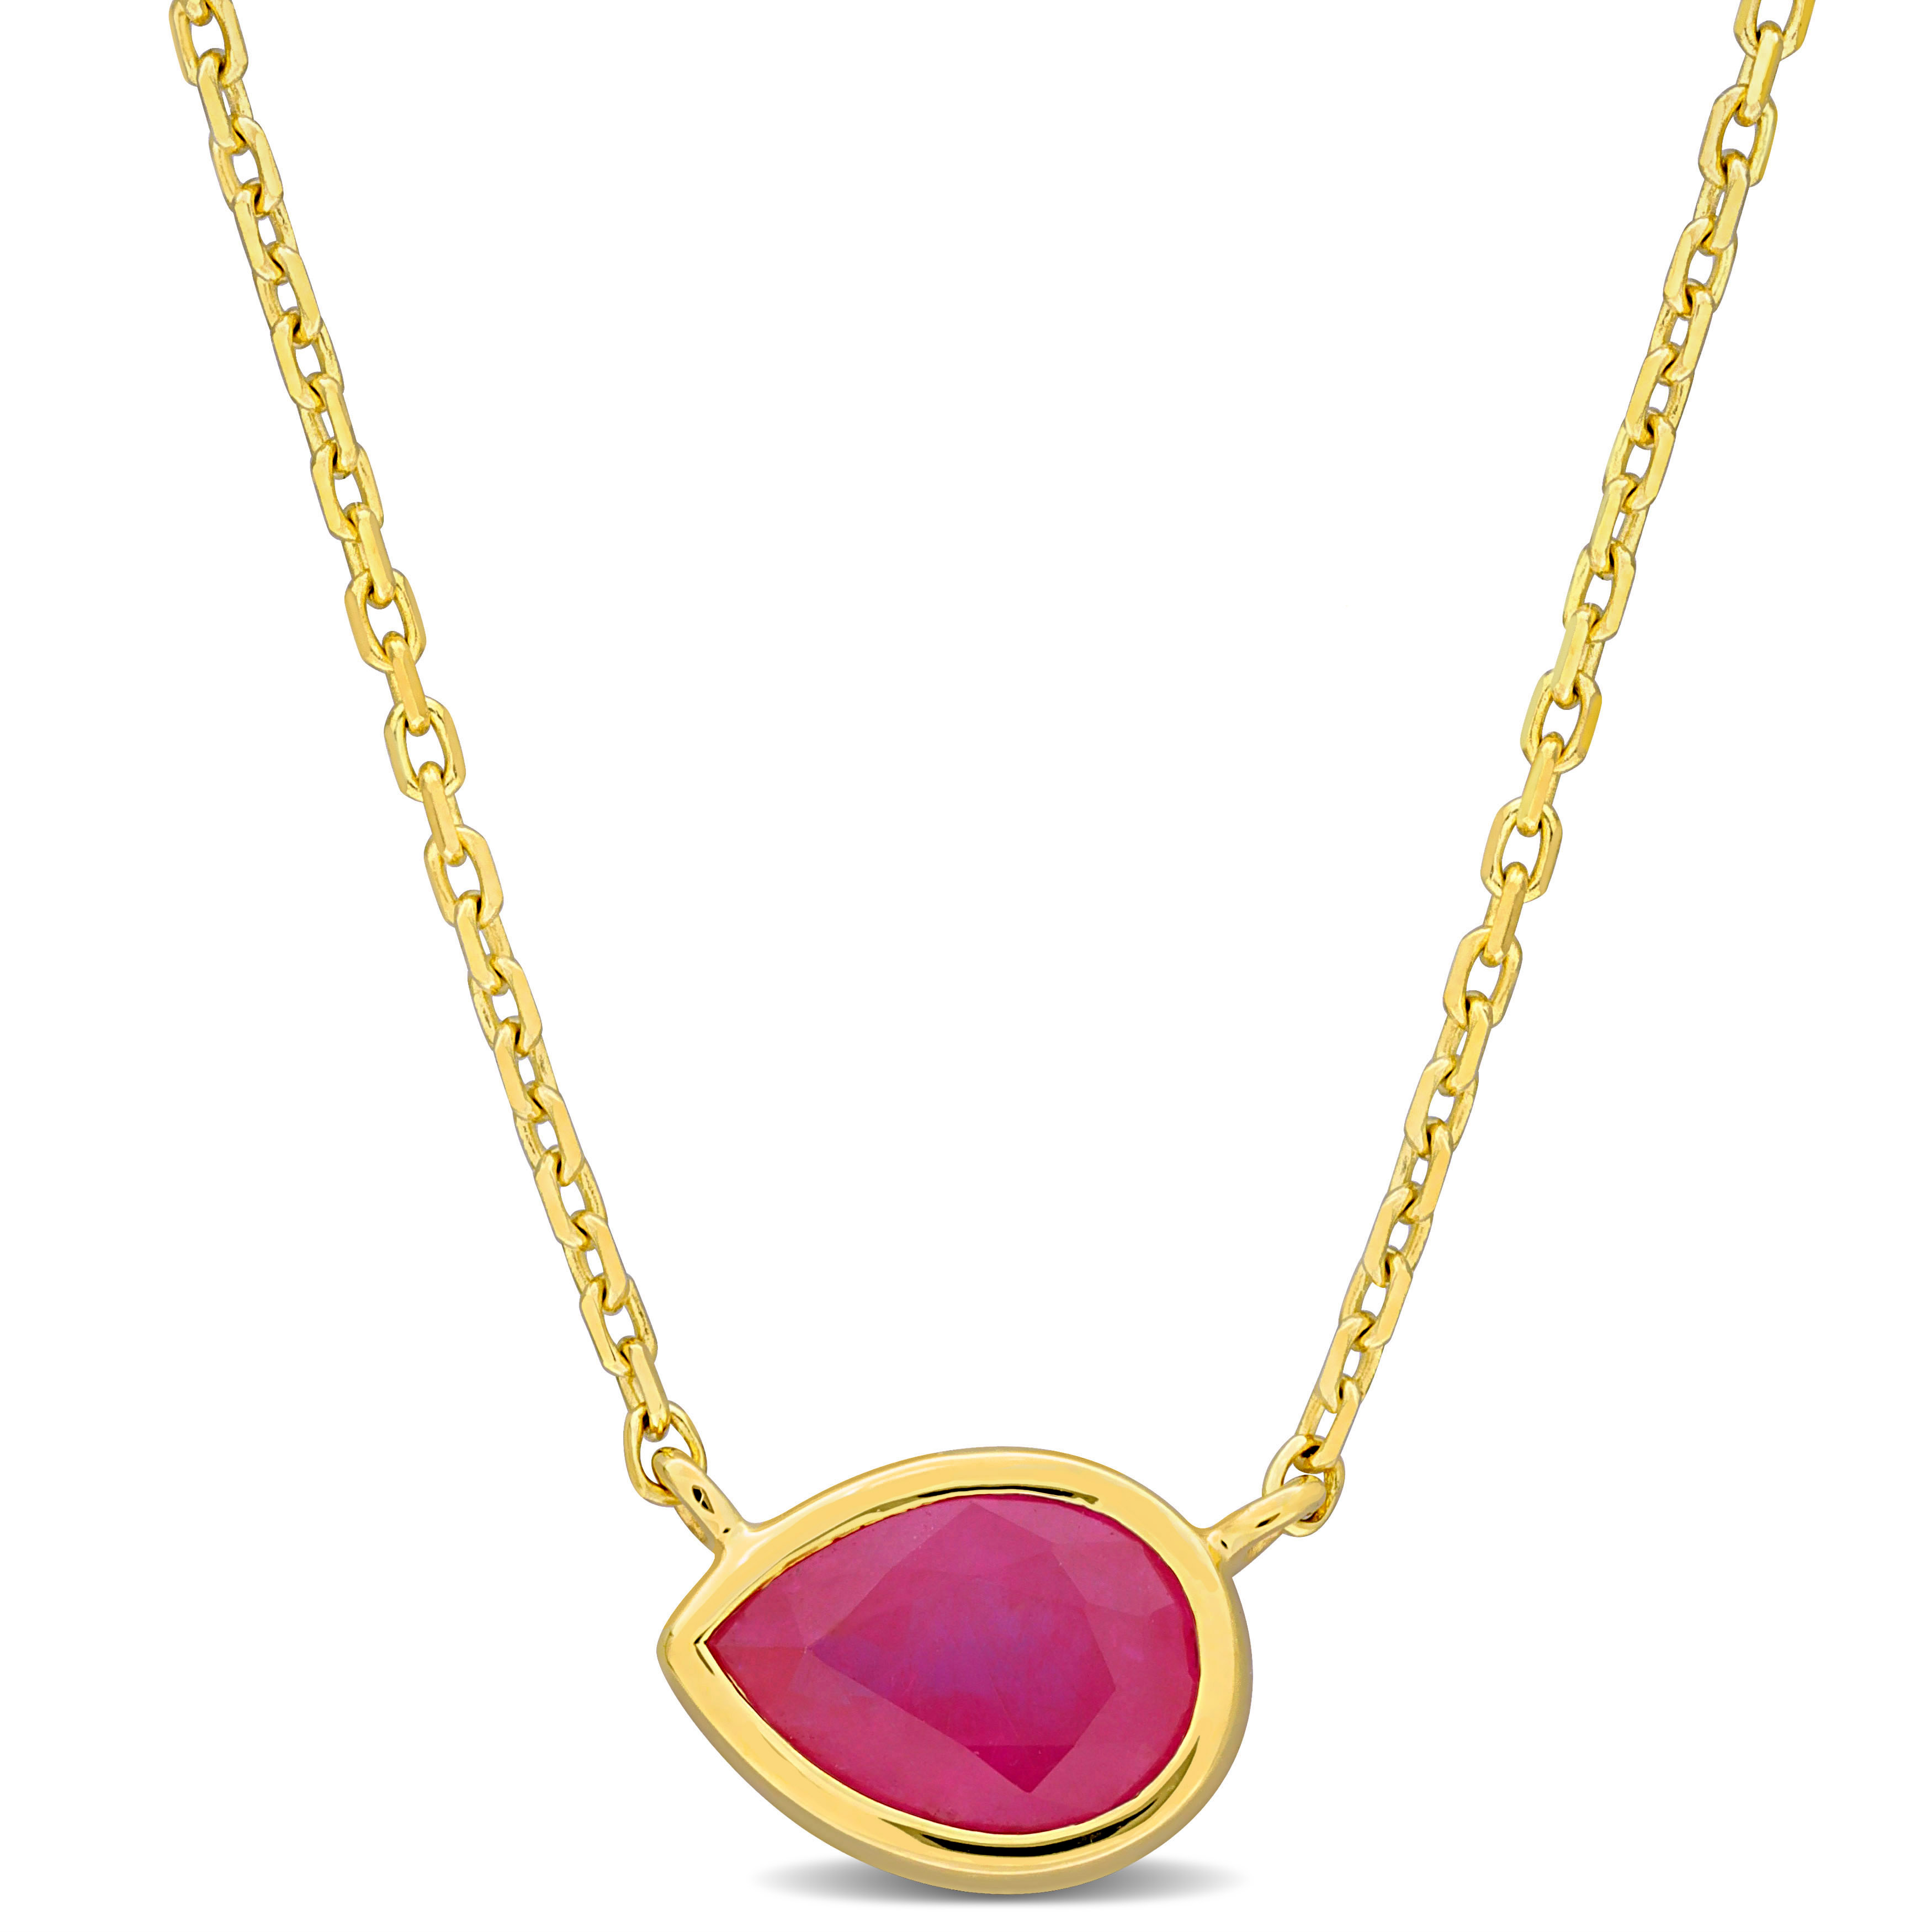 3/4 CT TGW Pear Shape Ruby Mounting Pendant w Chain Necklace in 10k Yellow Gold - 16.5 in